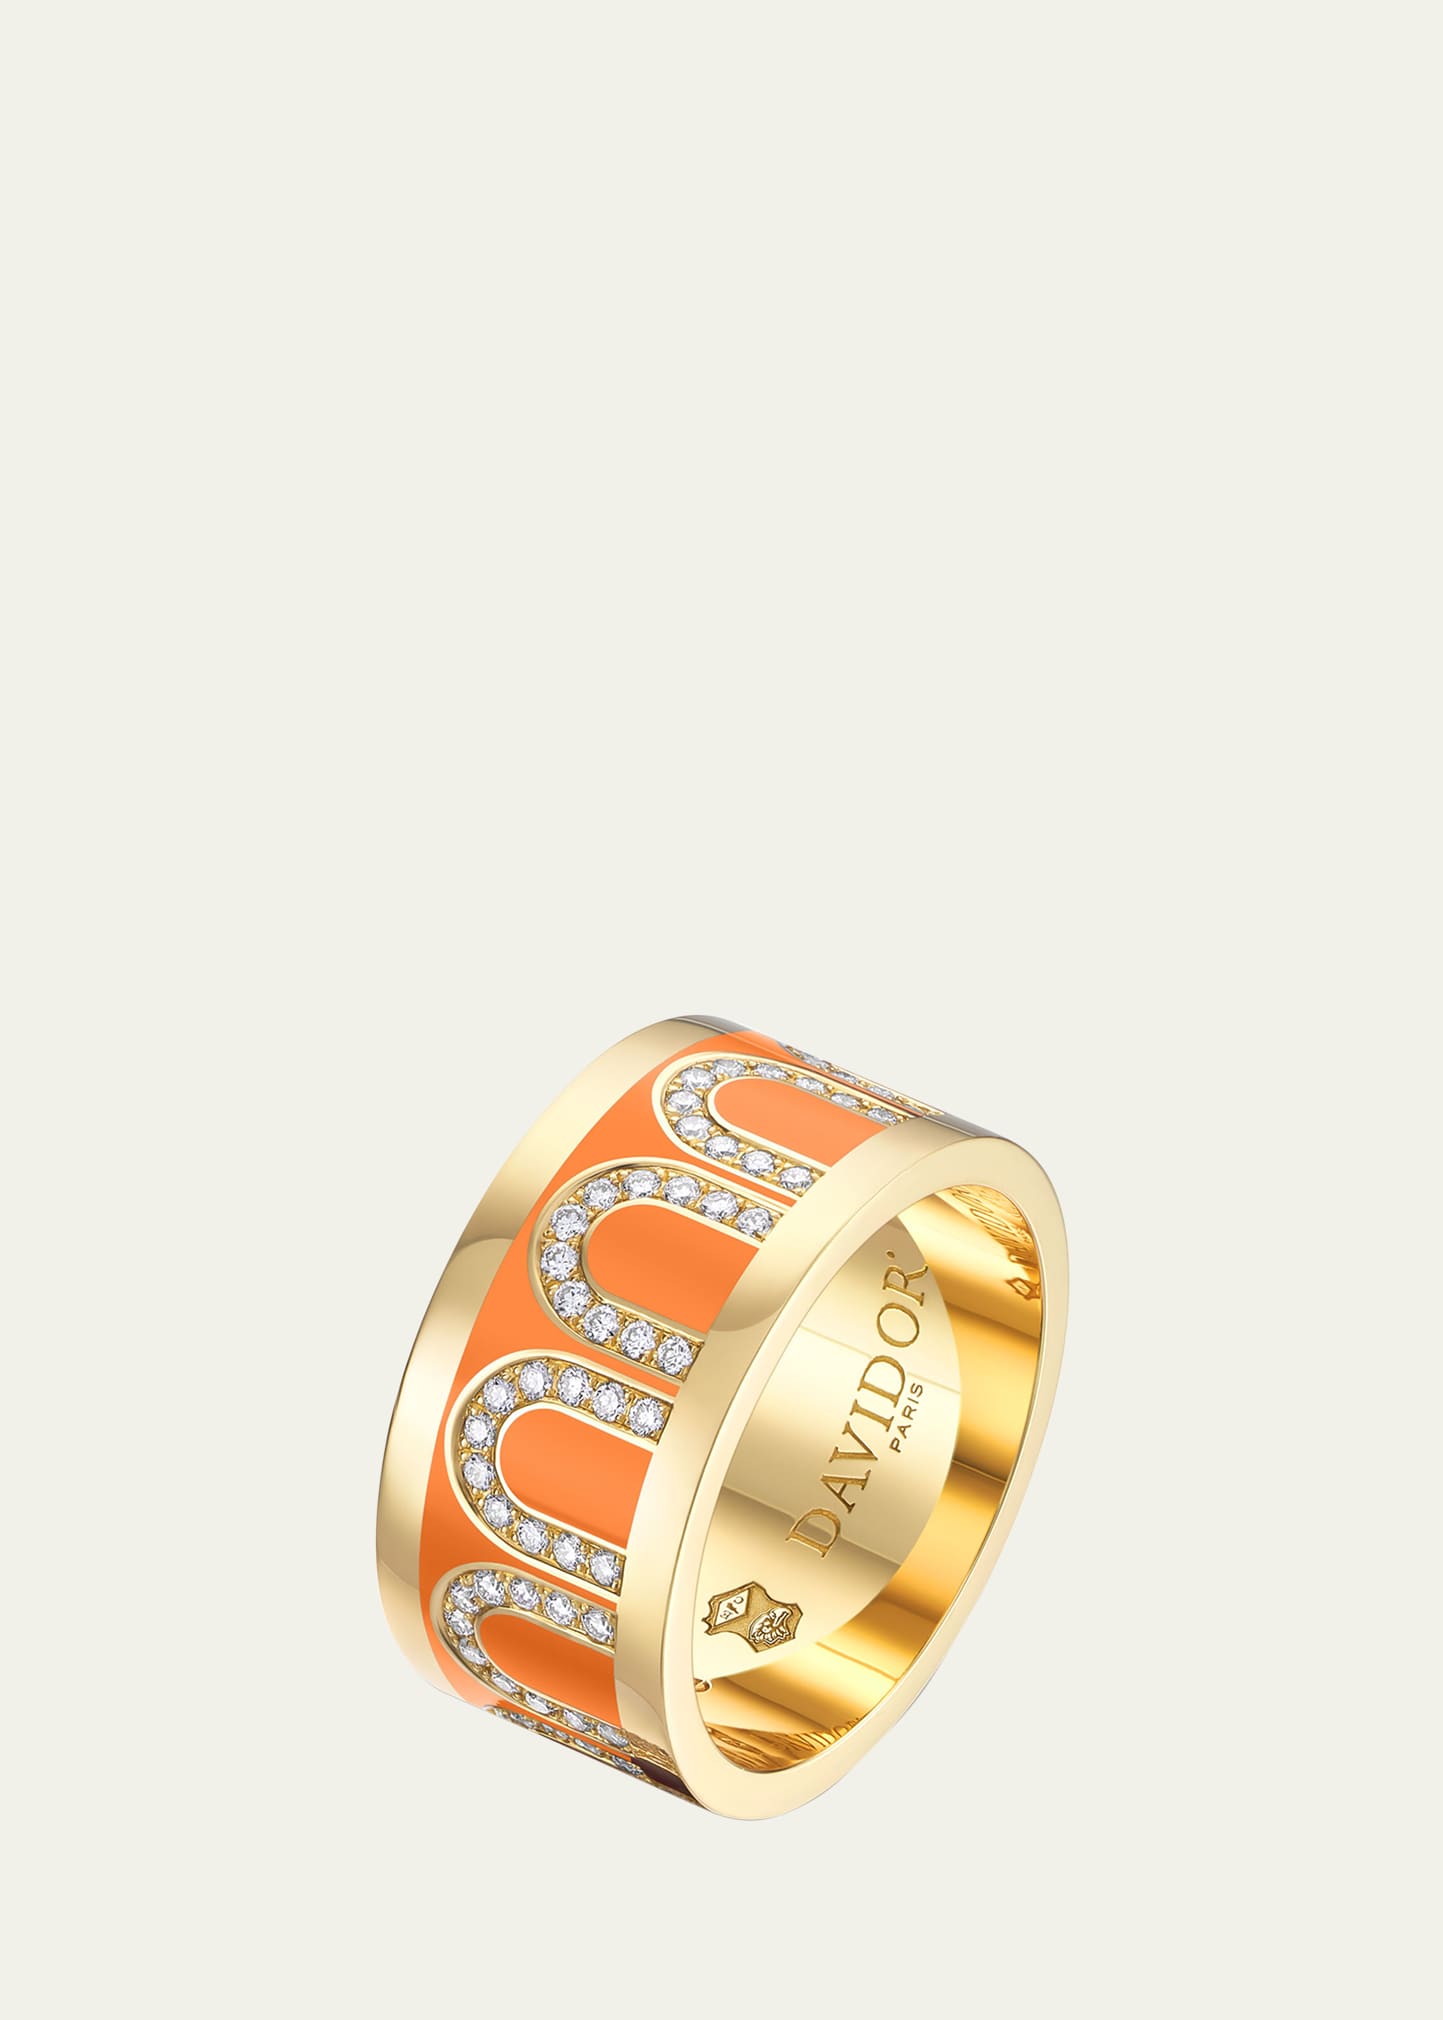 Davidor L'arc De  Ring Gm In 18k Yellow Gold With Zeste Lacquered Ceramic And Arcade Diamonds